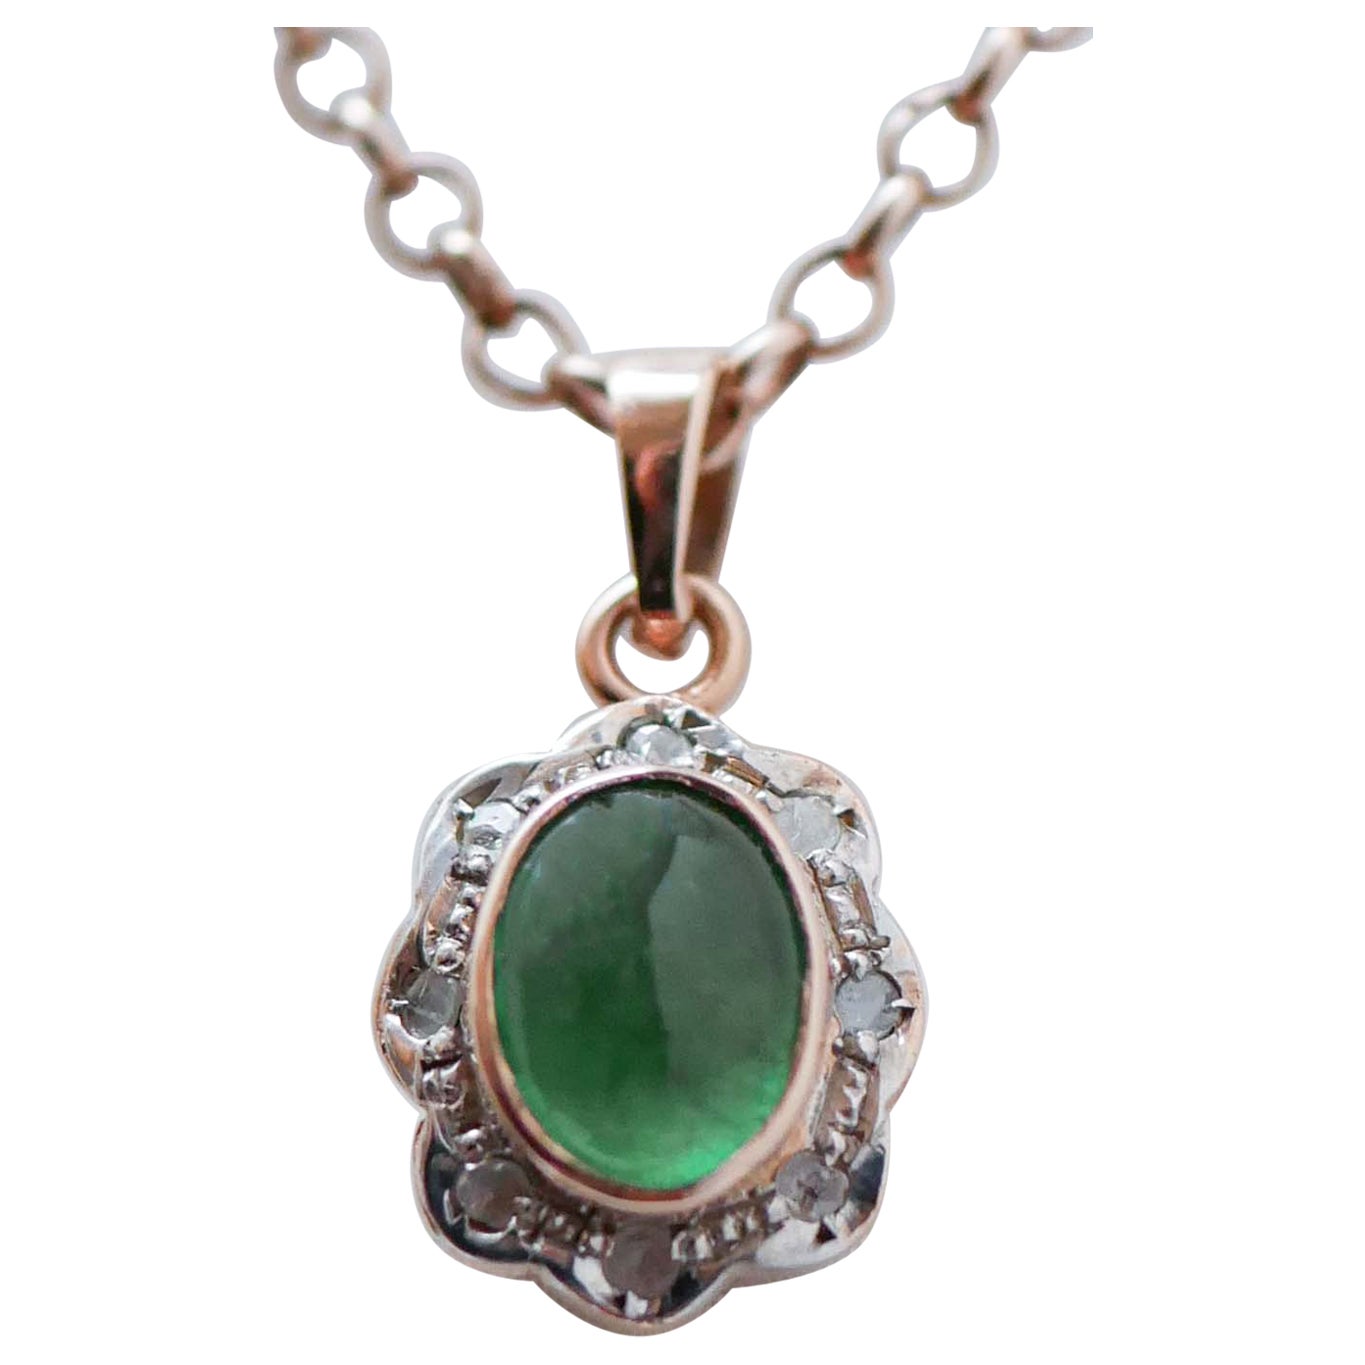 Emerald, Diamonds, Rose Gold and Silver Pendant Necklace.